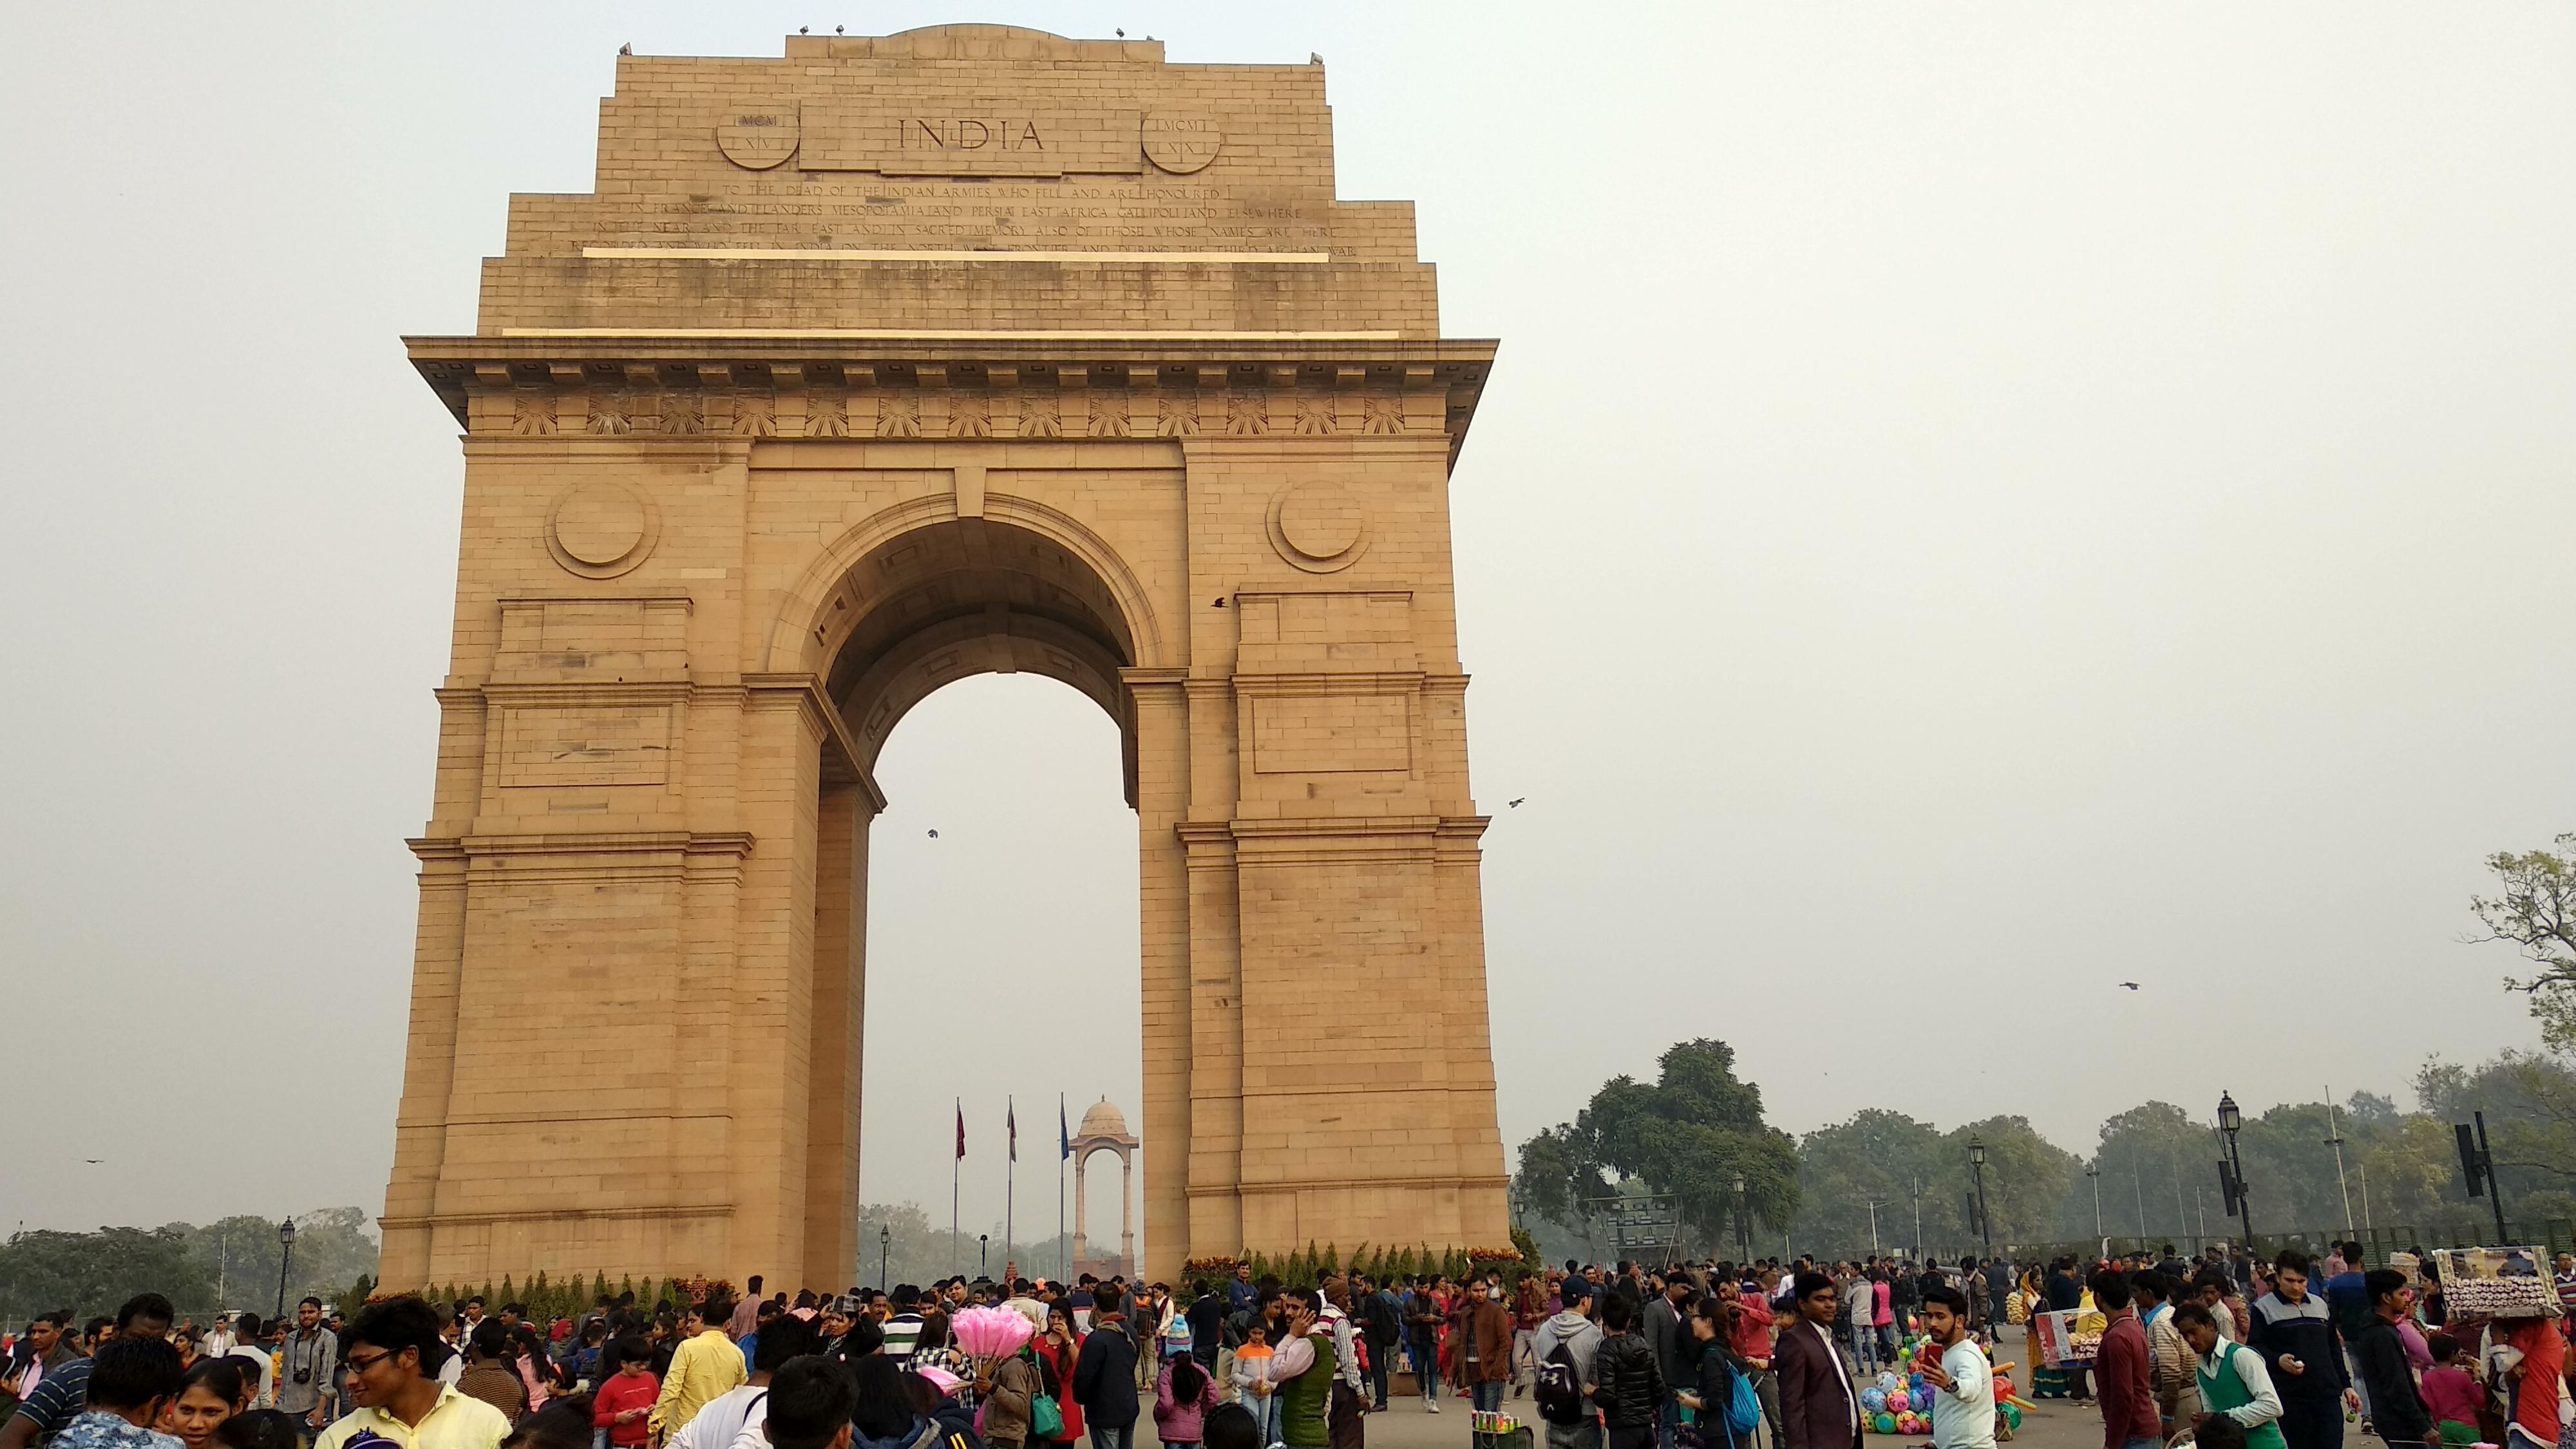 India Gate Monument in New Delhi - Video Reviews, Photos, History ...